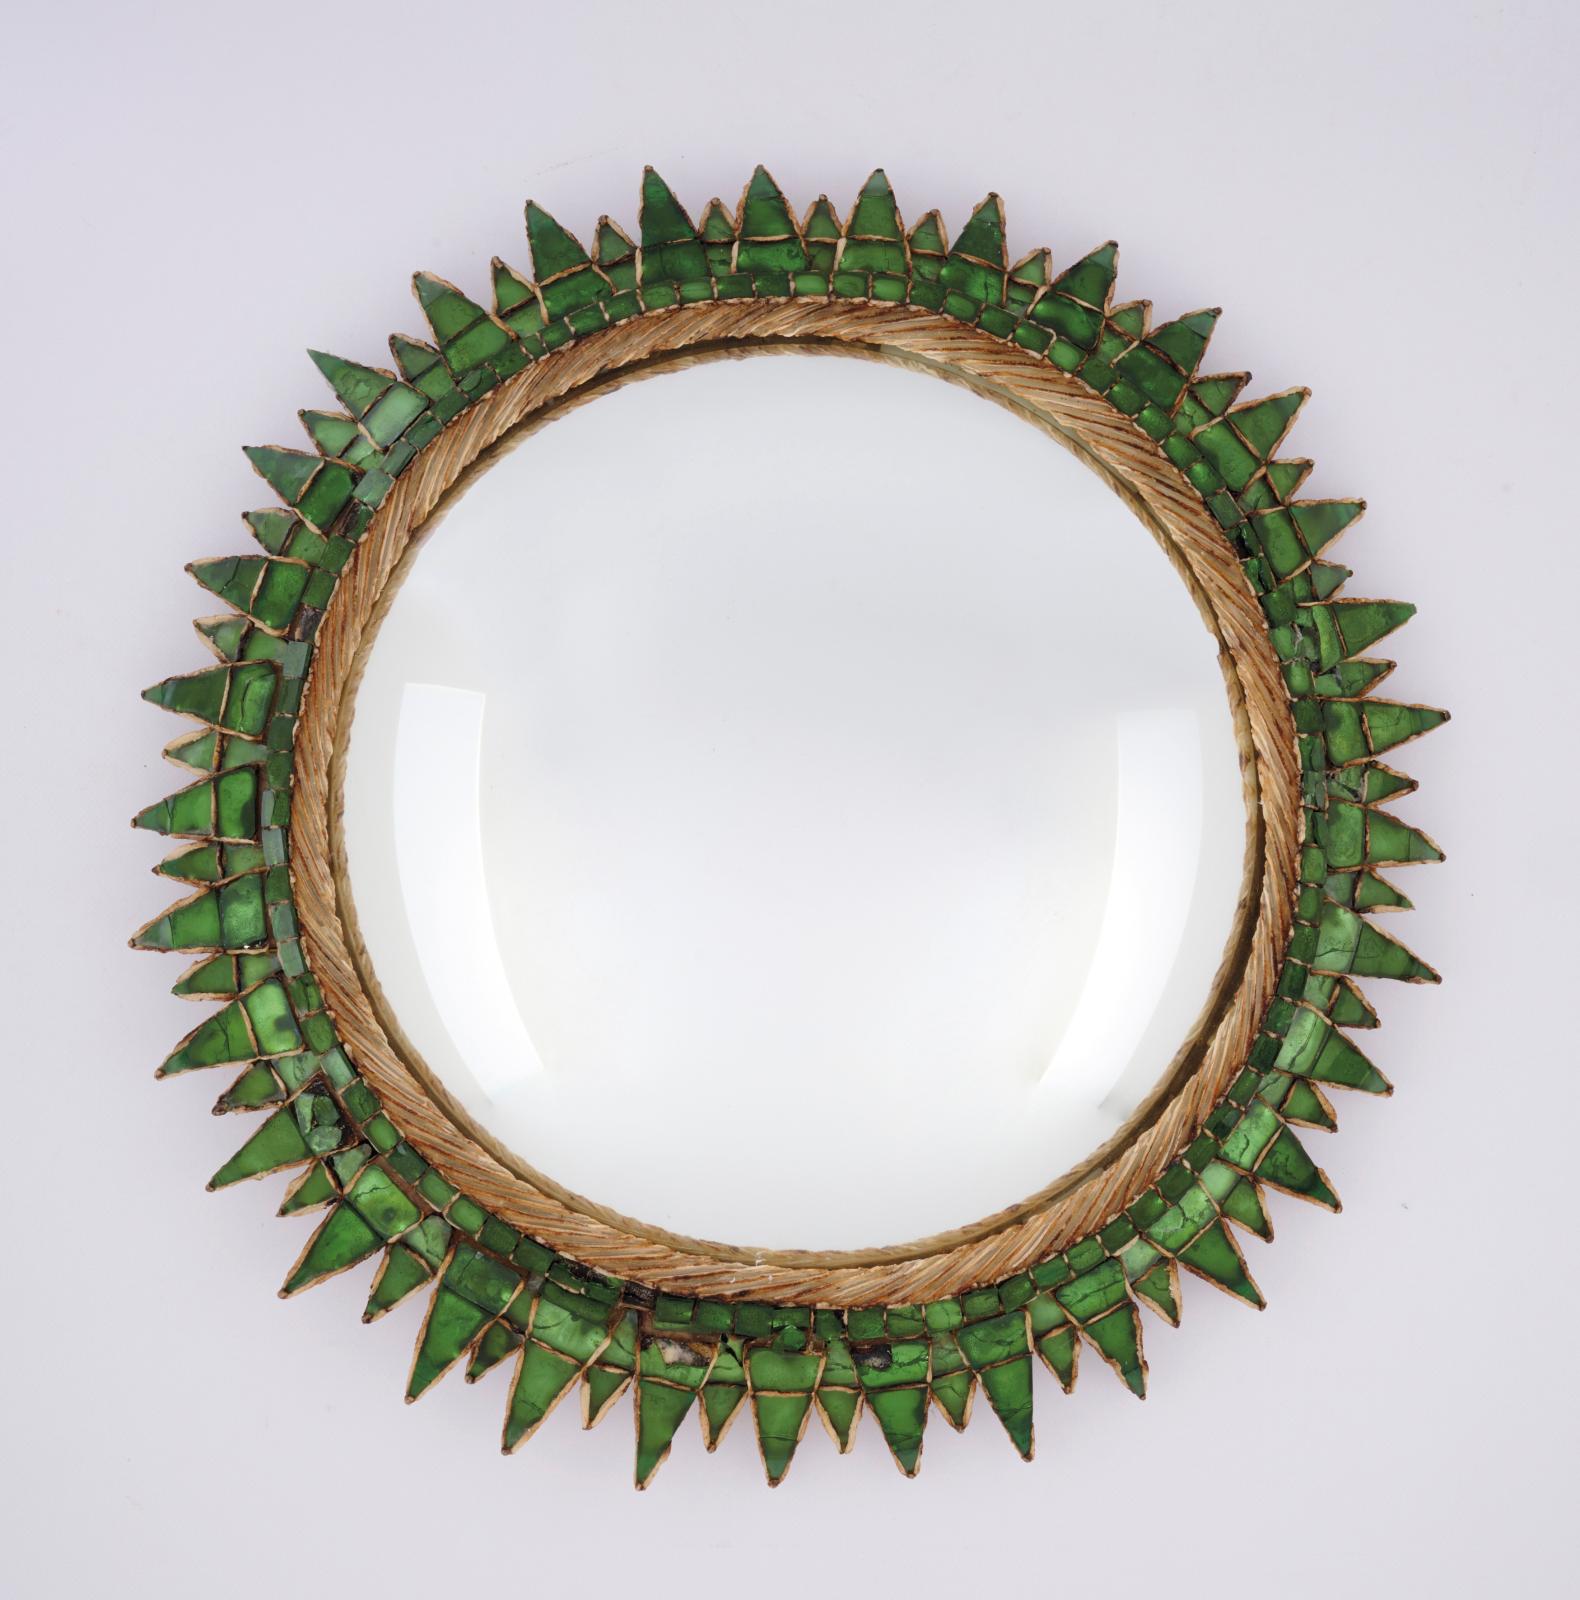 Line Vautrin’s Witch Mirror: As Spellbinding As Ever 